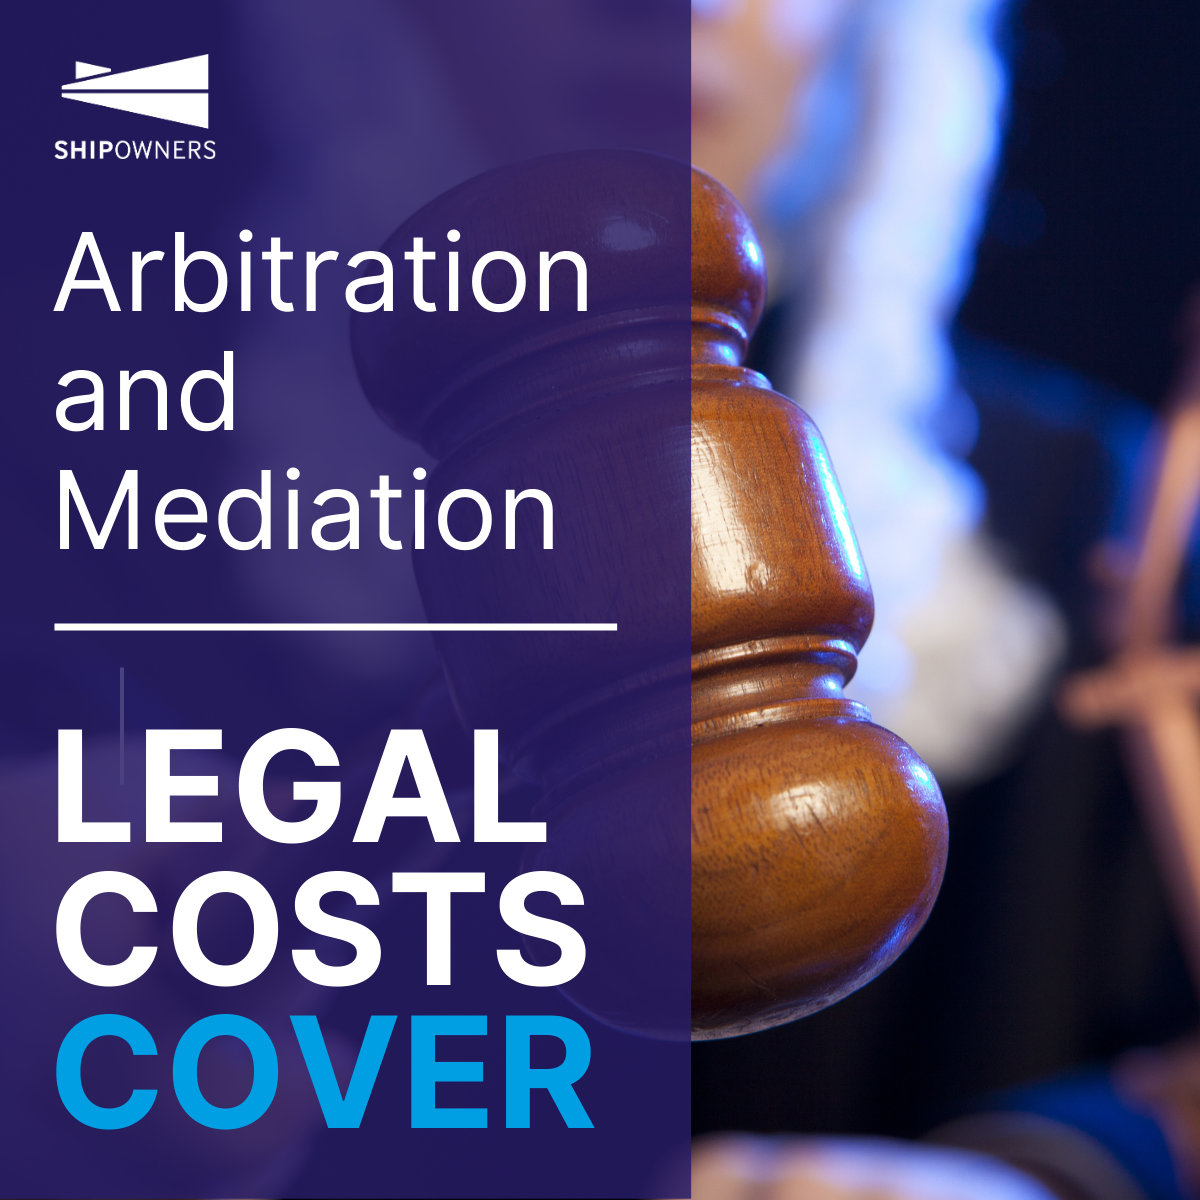 LEGAL COSTS COVER Arbitration and Mediation (2).png